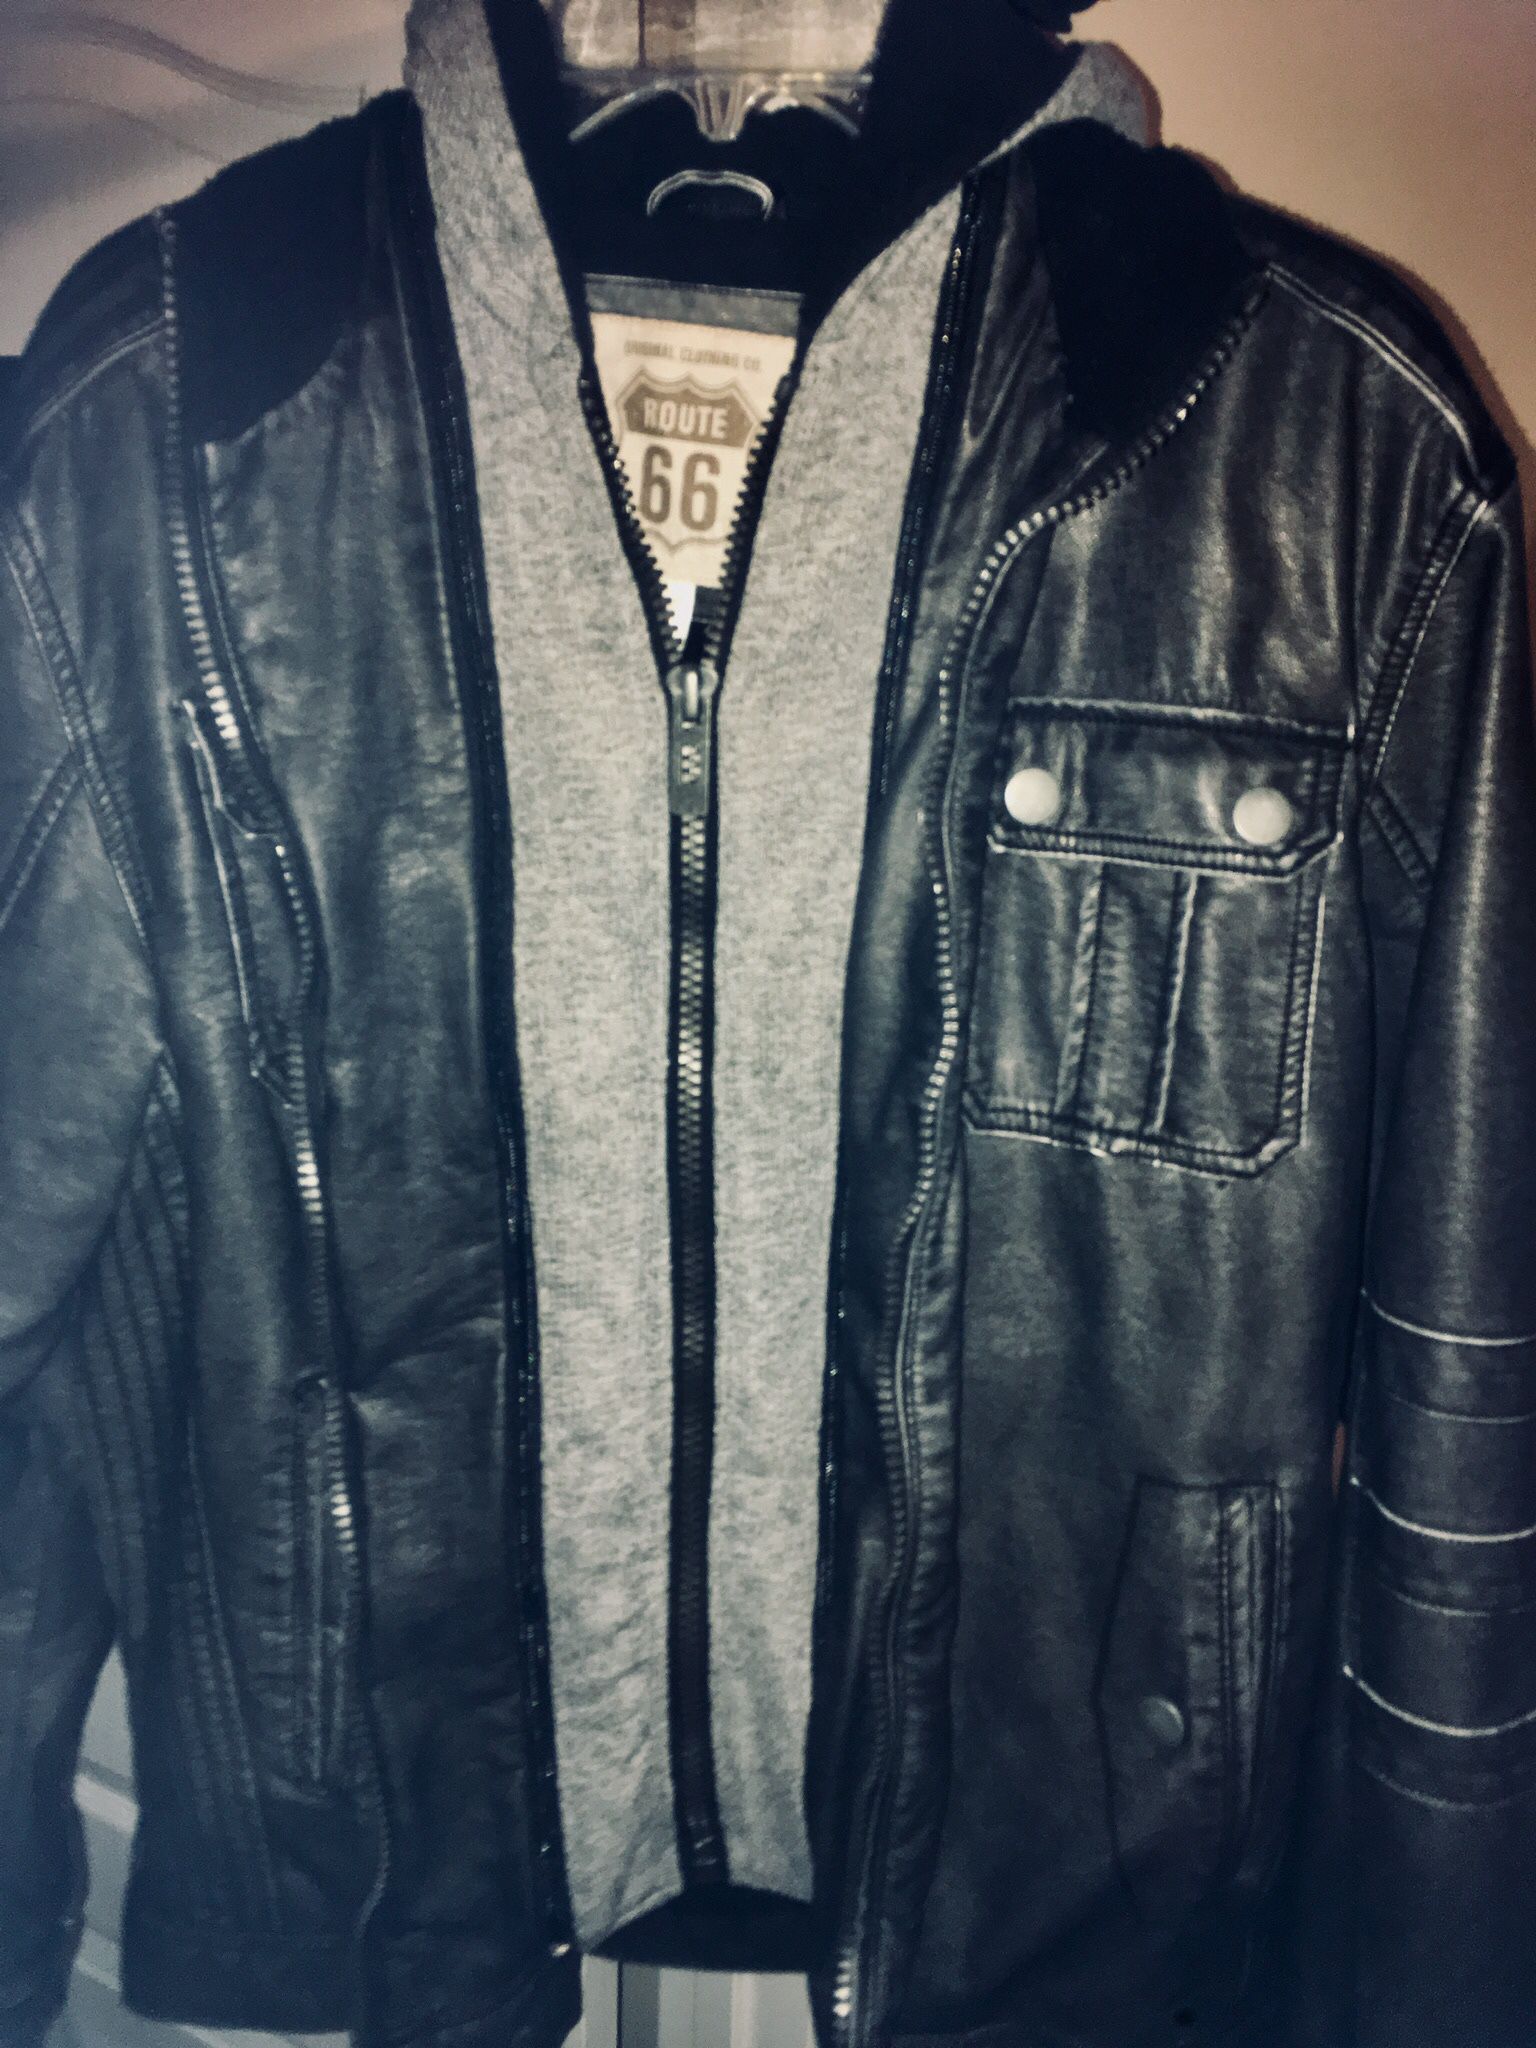 Route 66 Layered Zip-On Charcoal Grey Hooded Leather Men’s Coat Jacket